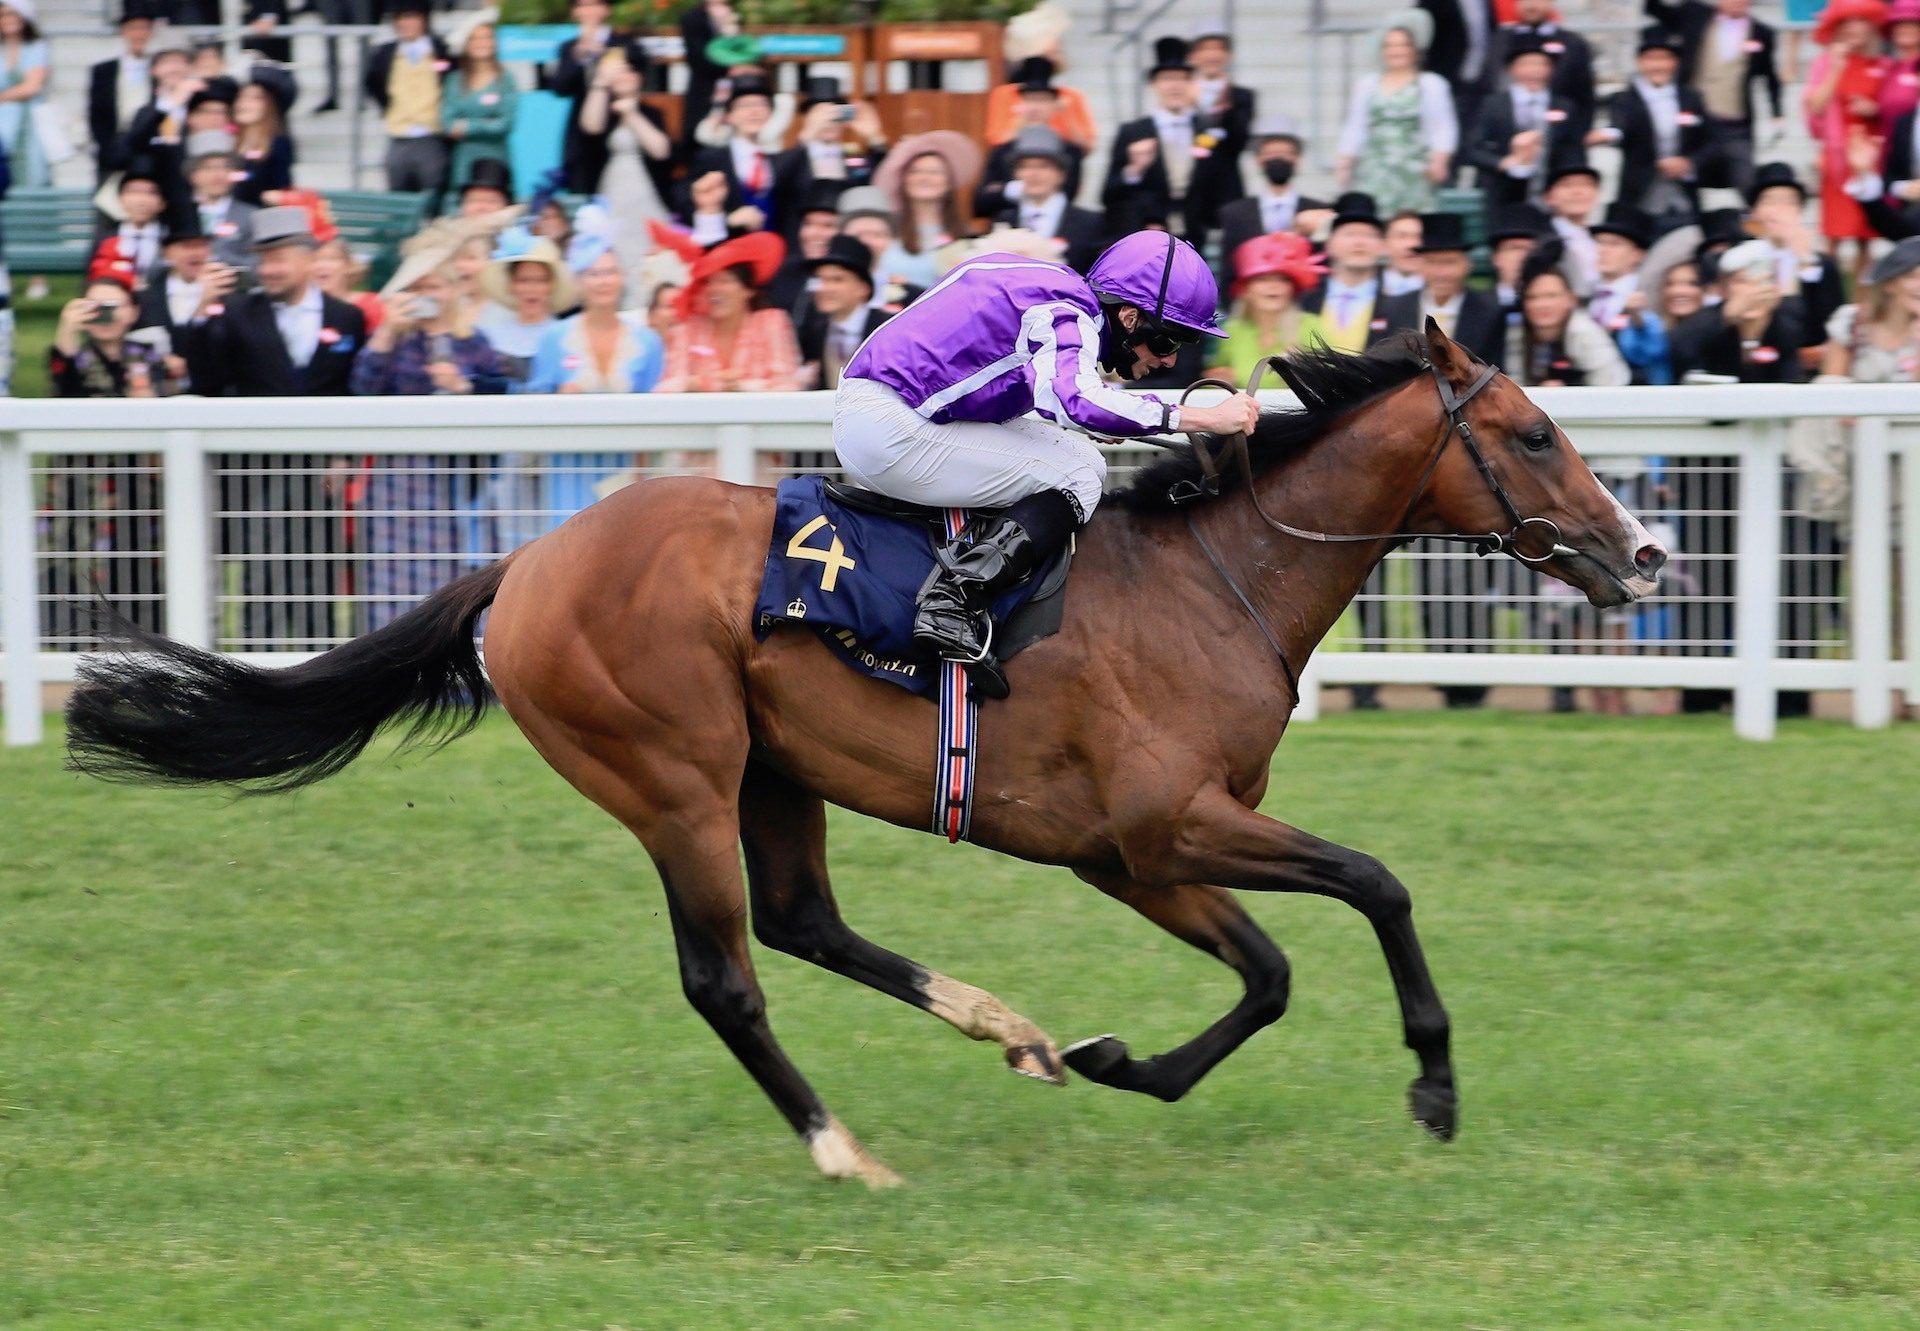 Point Lonsdale (Australia) Wins The Listed Chesham Stakes at Royal Ascot